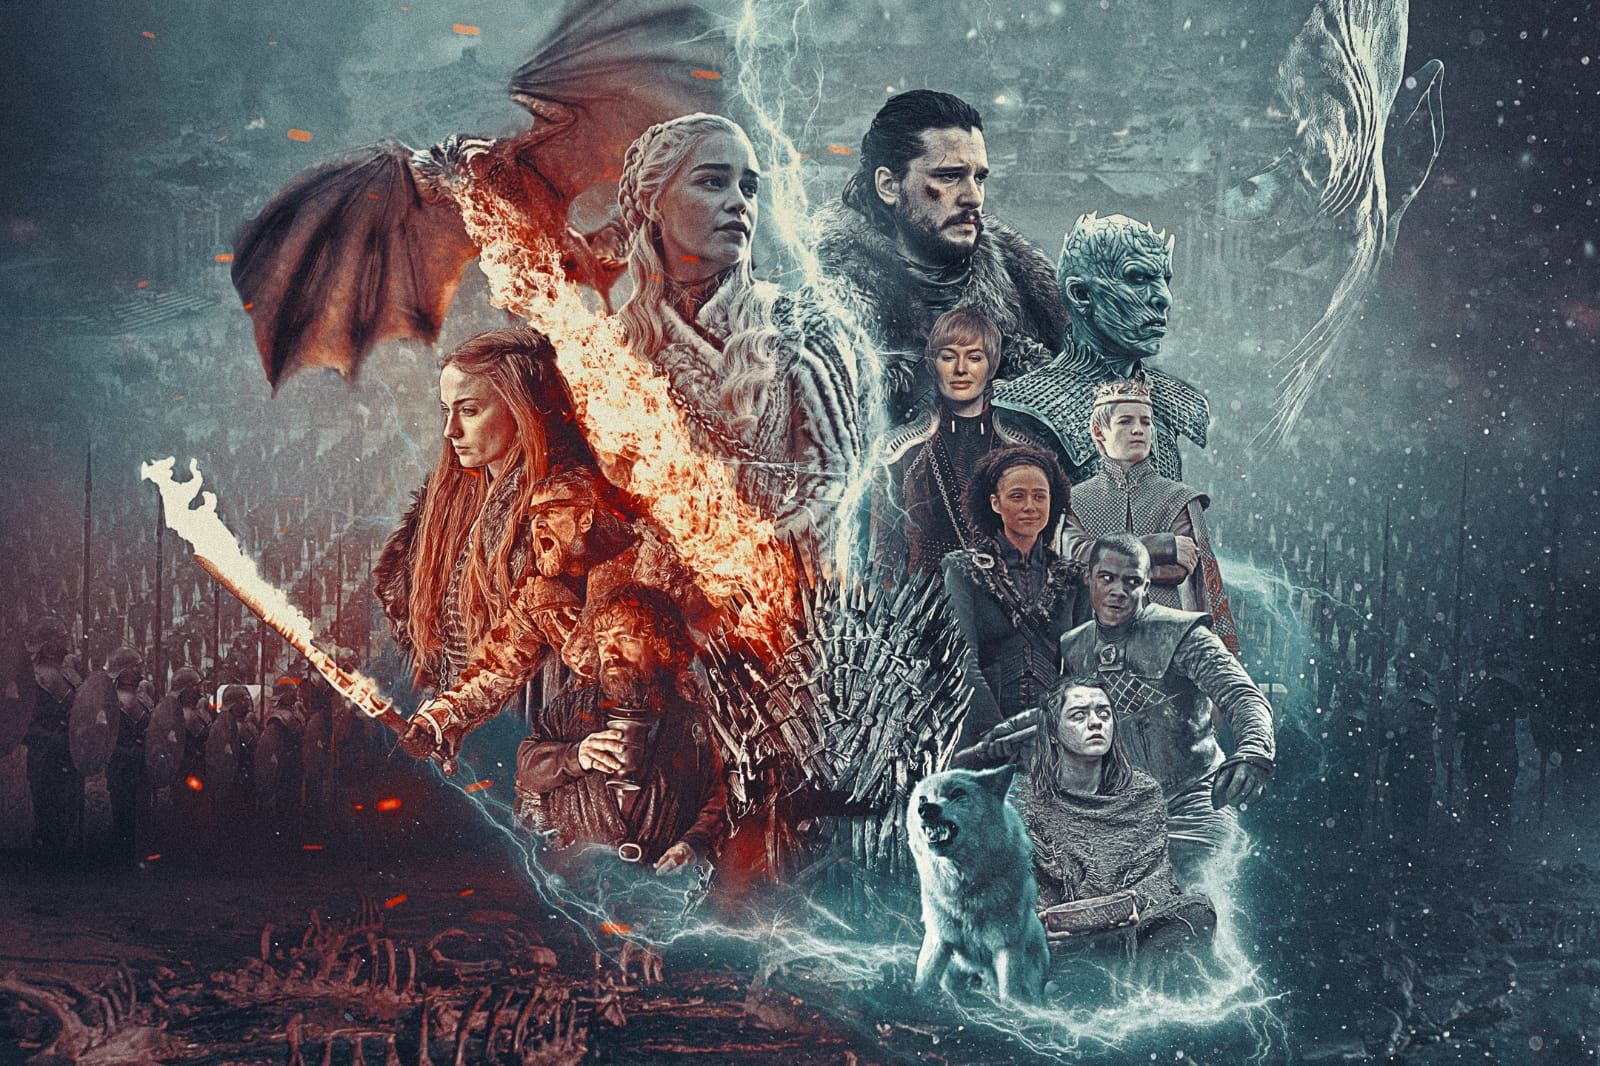 Game Of Thrones”